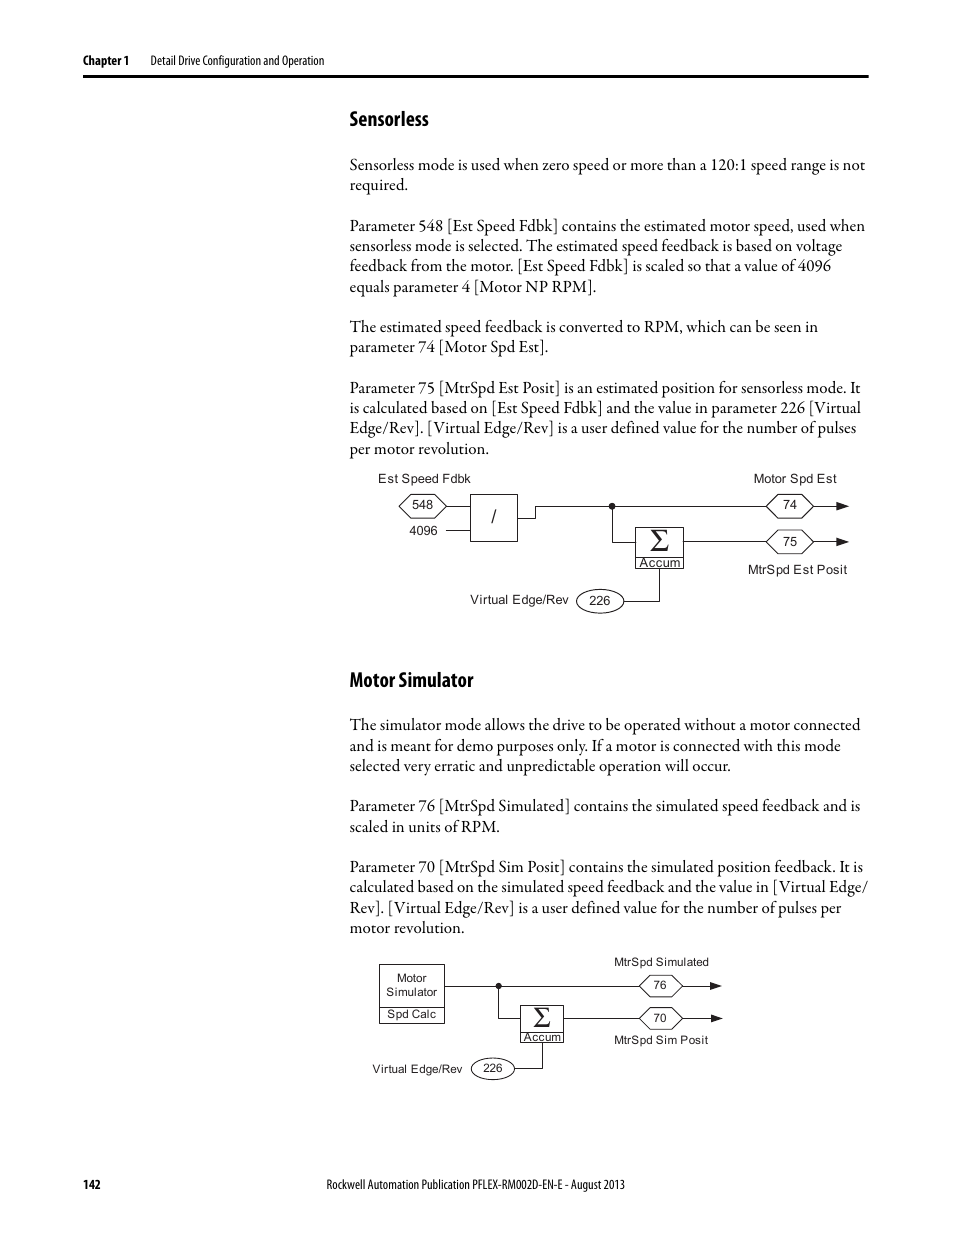 Sensorless, Motor simulator, Sensorless motor simulator | Rockwell Automation 20D PowerFlex 700S with Phase I Control Reference Manual User Manual | Page 142 / 190